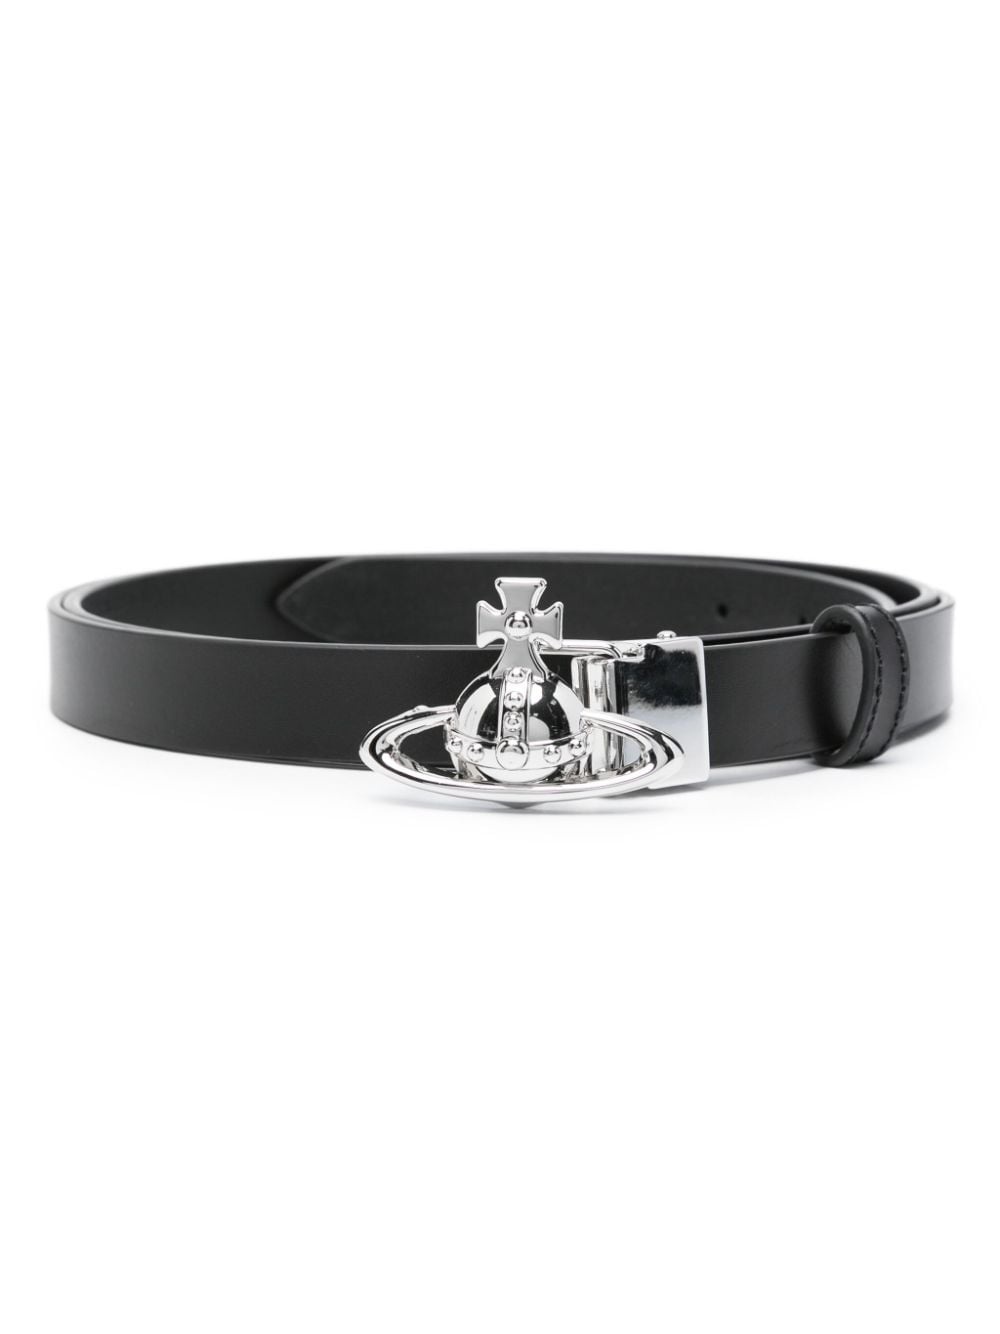 Orb-buckle leather belt - 1